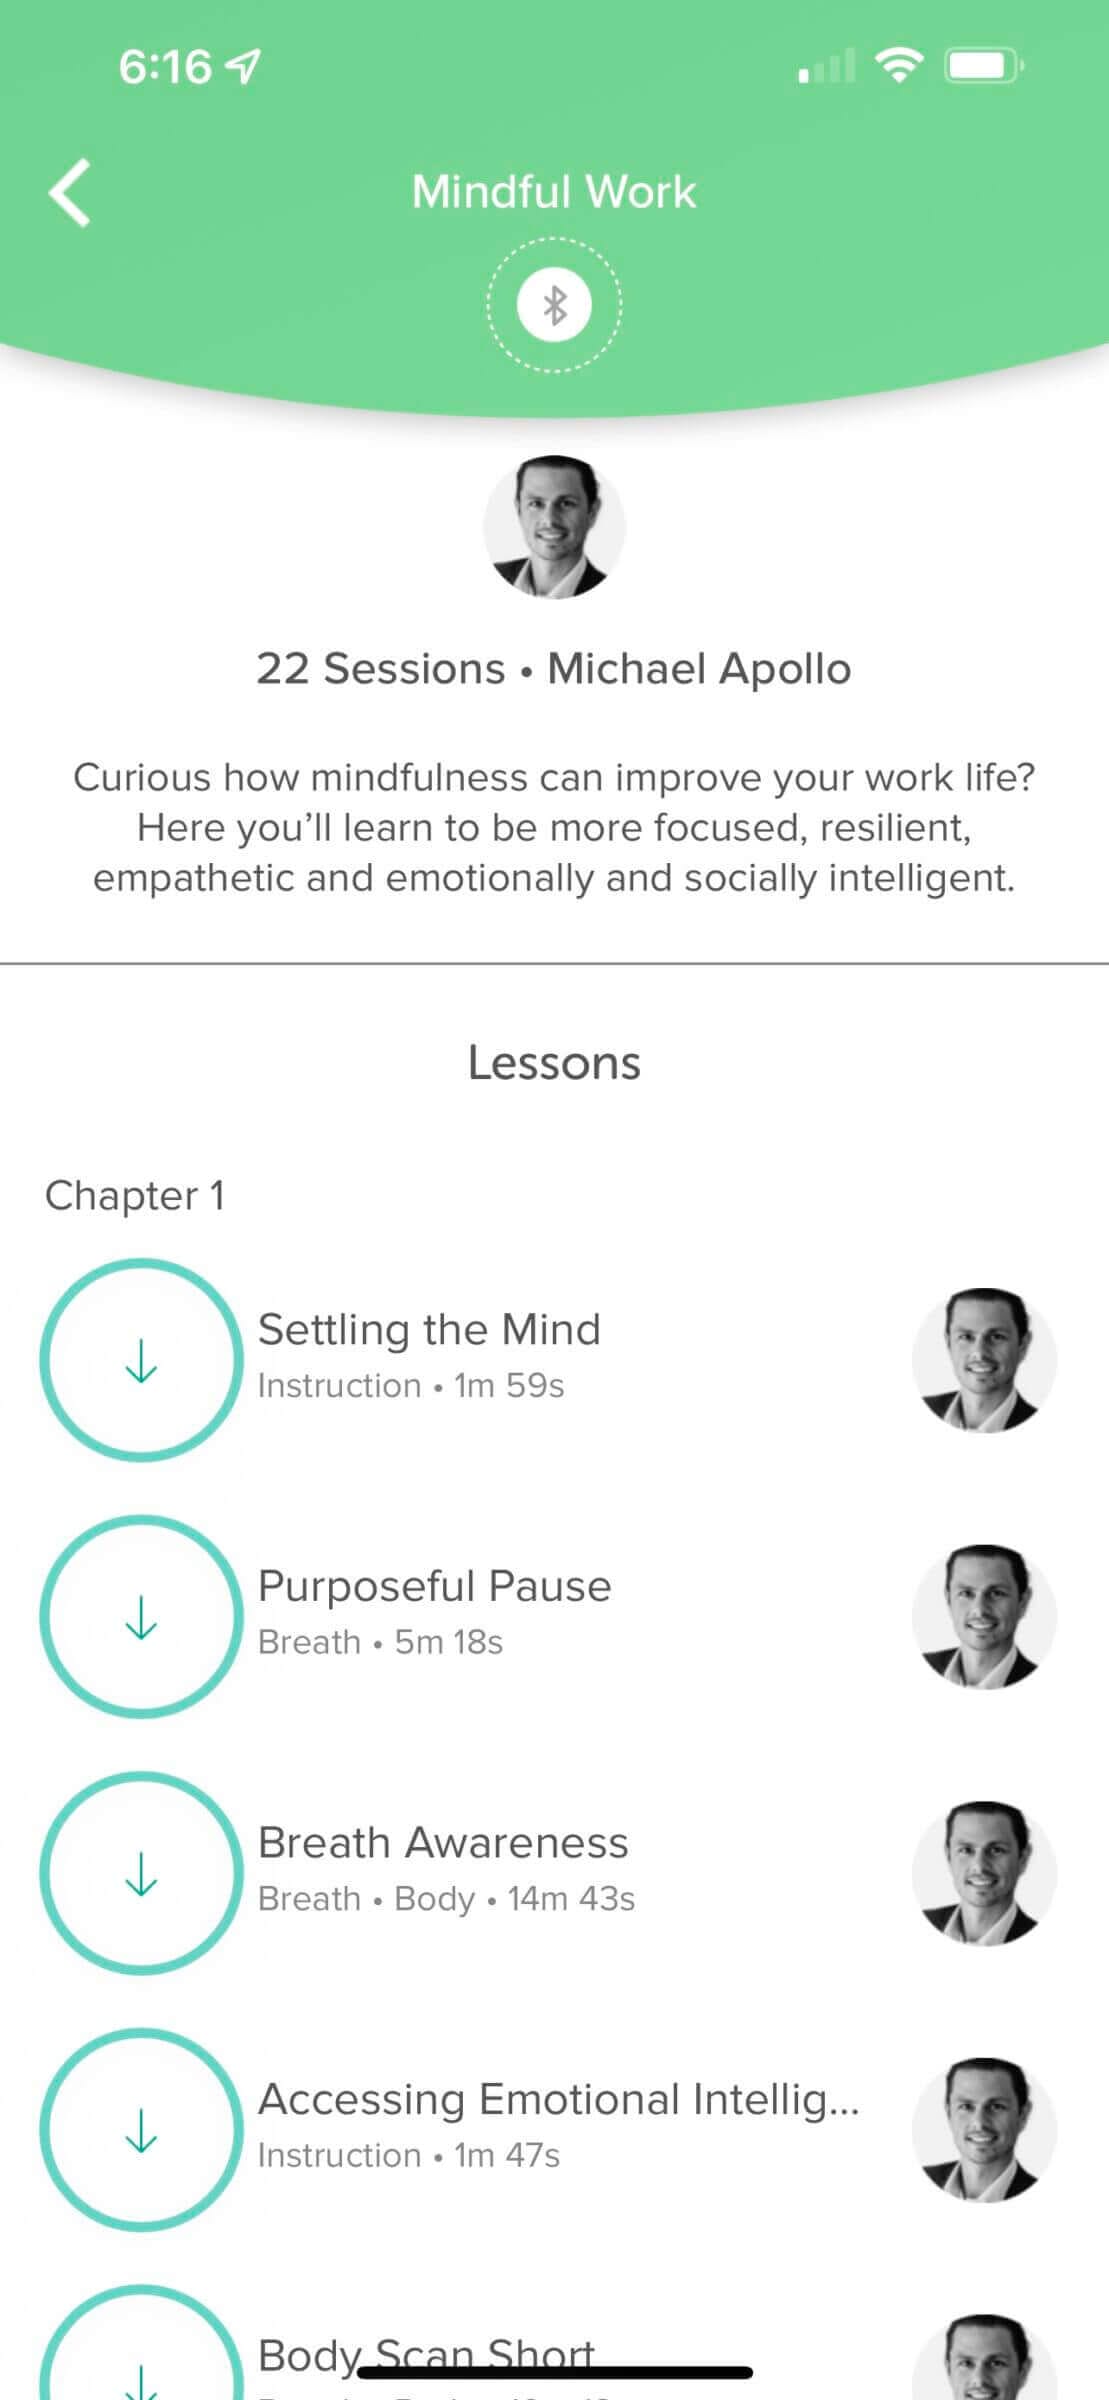 Some of the lessons included in the Mindful Work course.